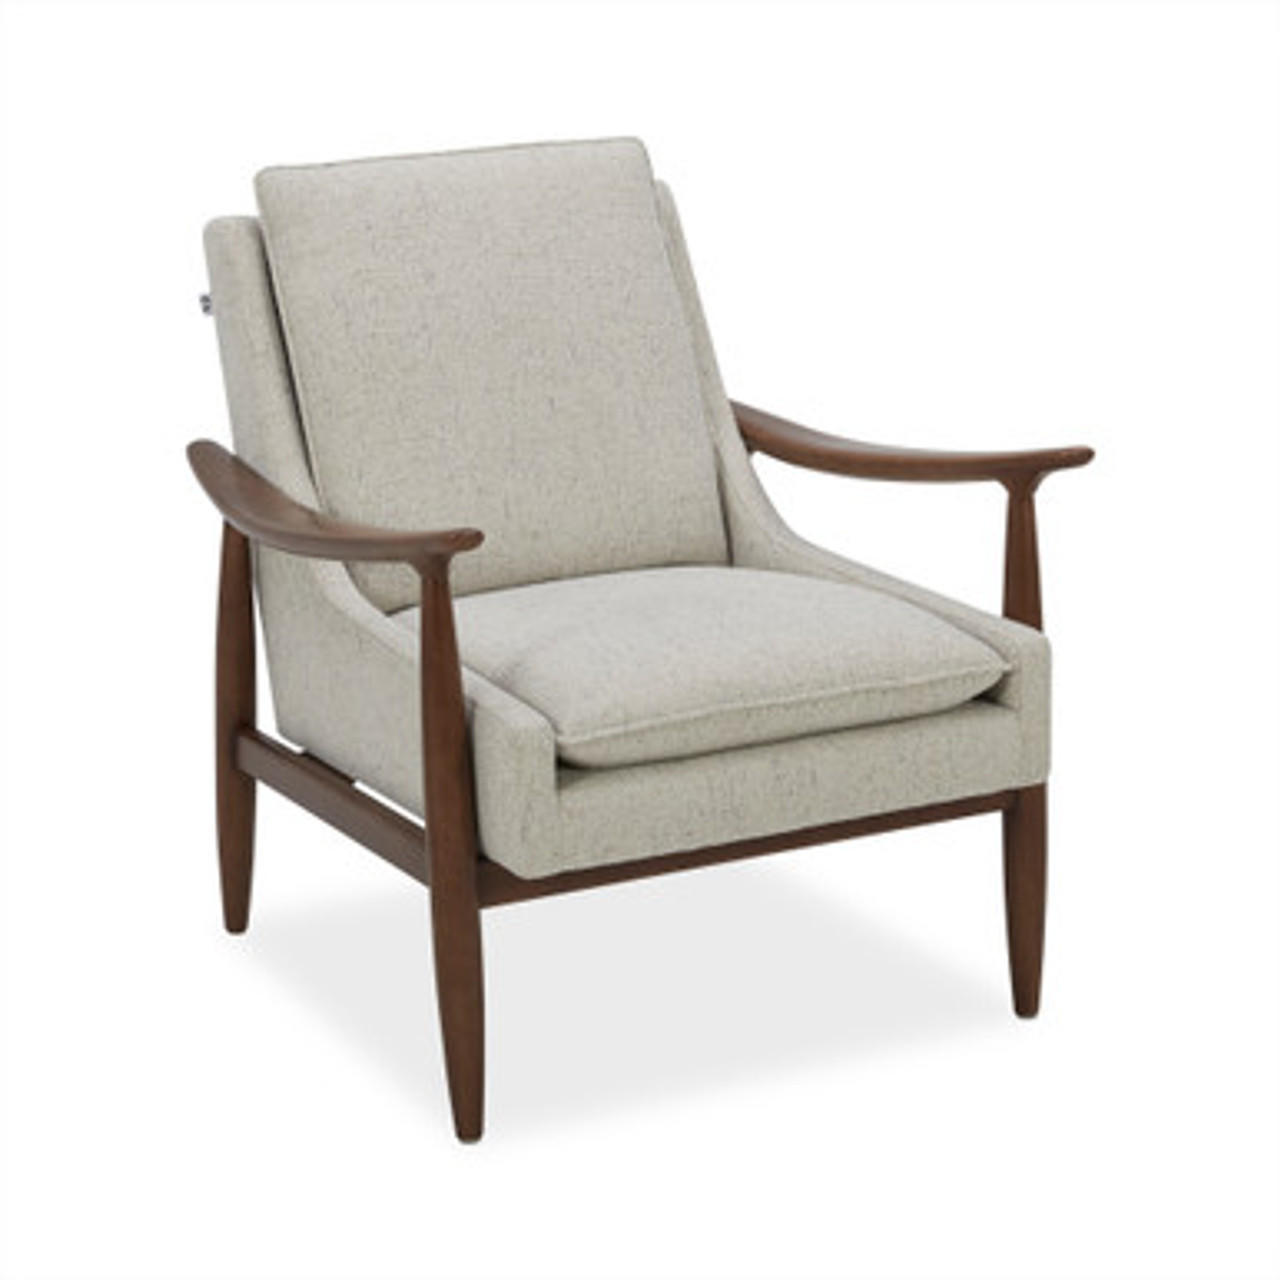  Office Source Mira Wood Arm Upholstered Mid Century Modern Lounge Chair OSRL3001 